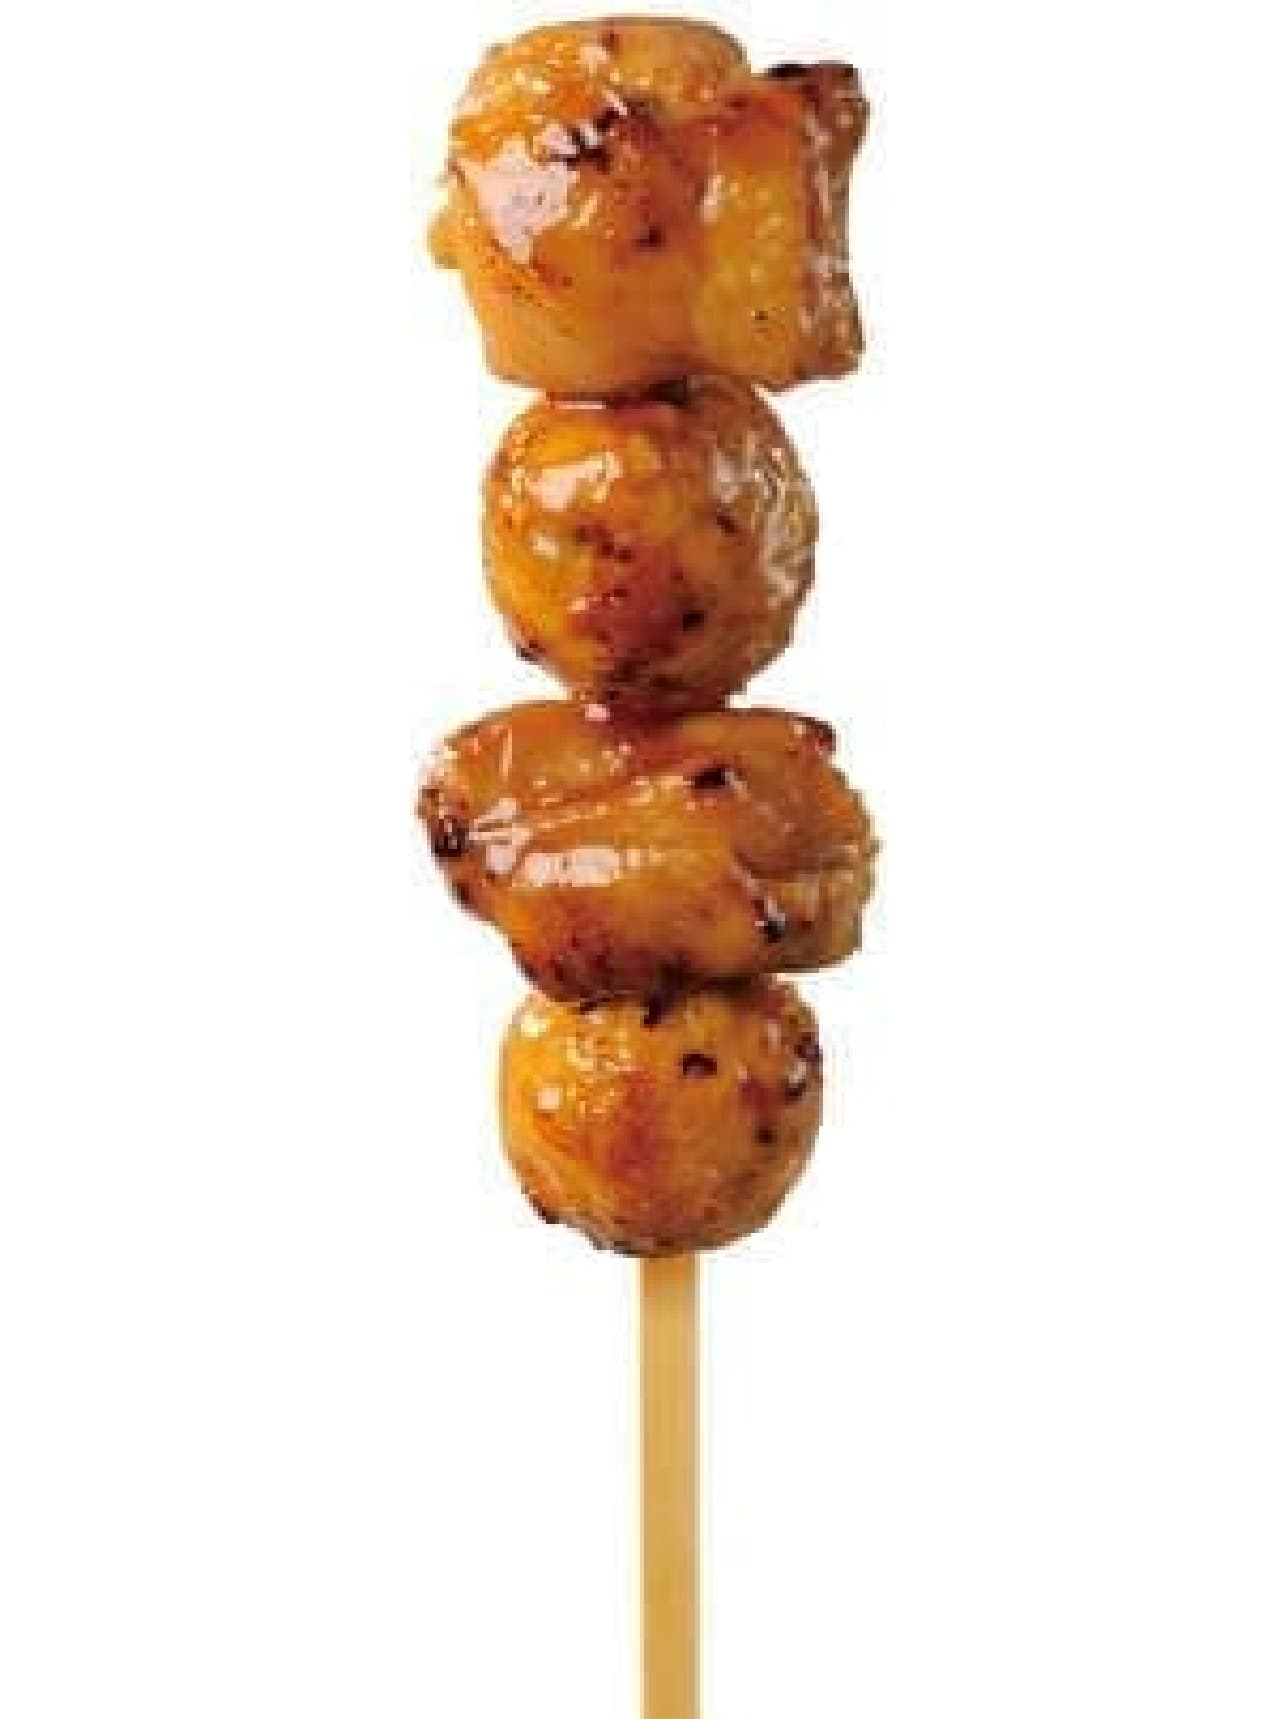 "Charcoal-grilled chicken (tsukune & peach)" is a charcoal-grilled chicken that you can enjoy meatballs and peaches at once.